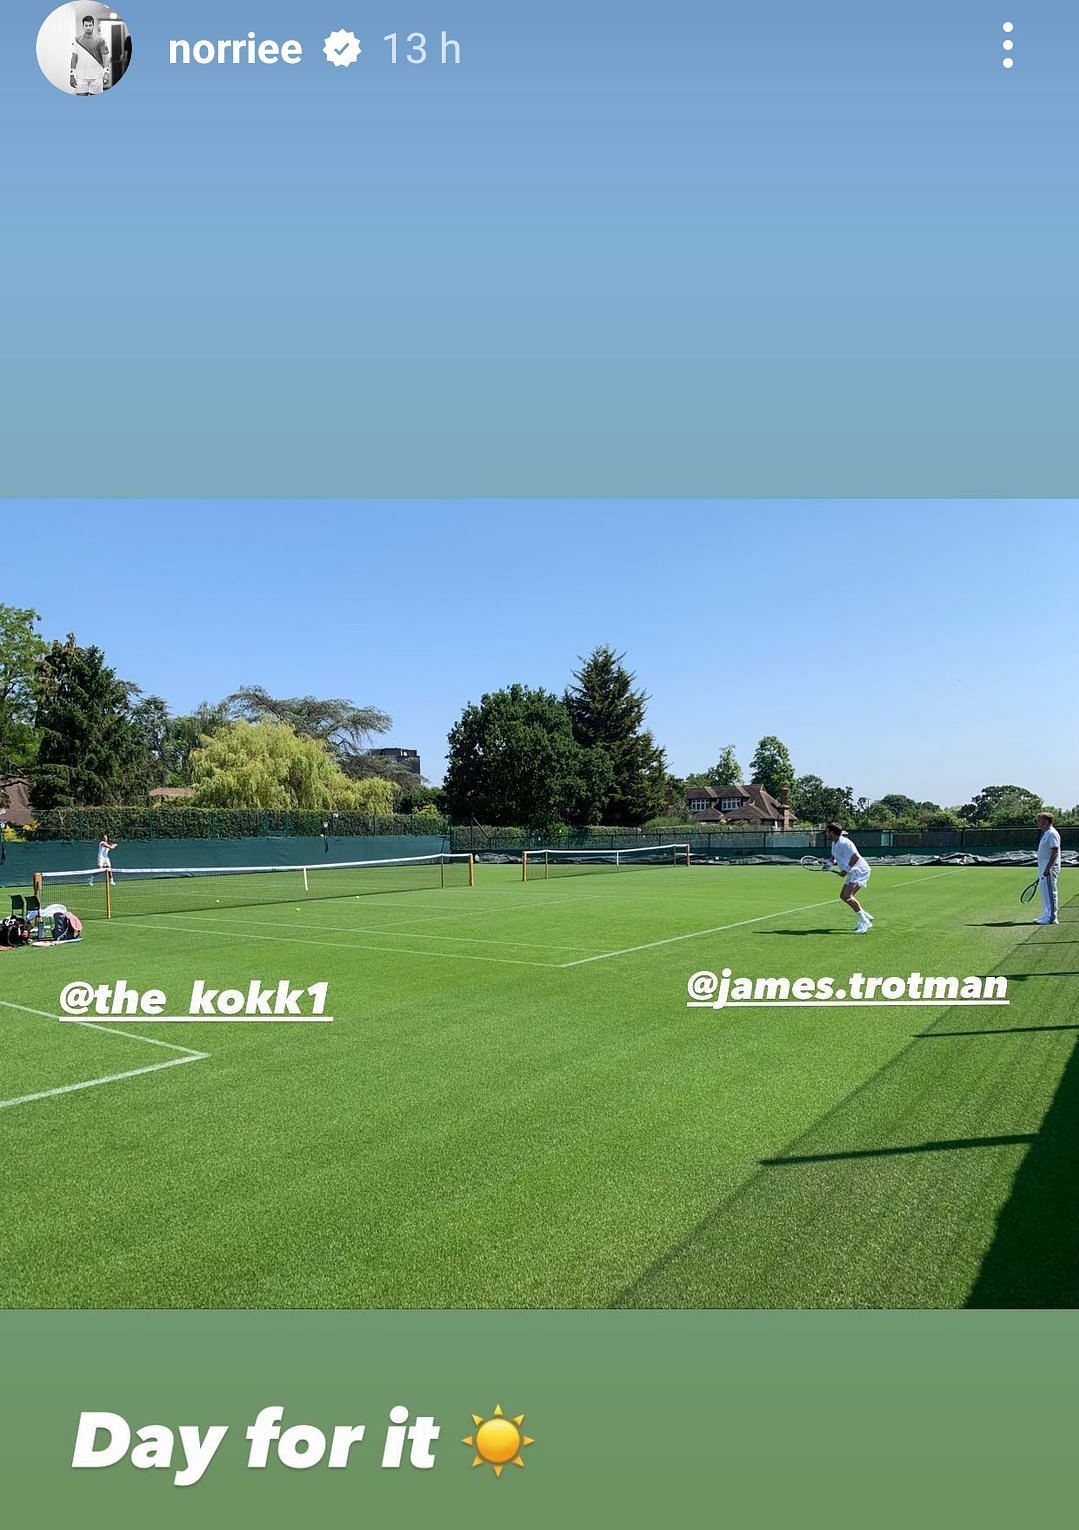 Cameron Norrie and Thanasi Kokkinakis train on the grass courts